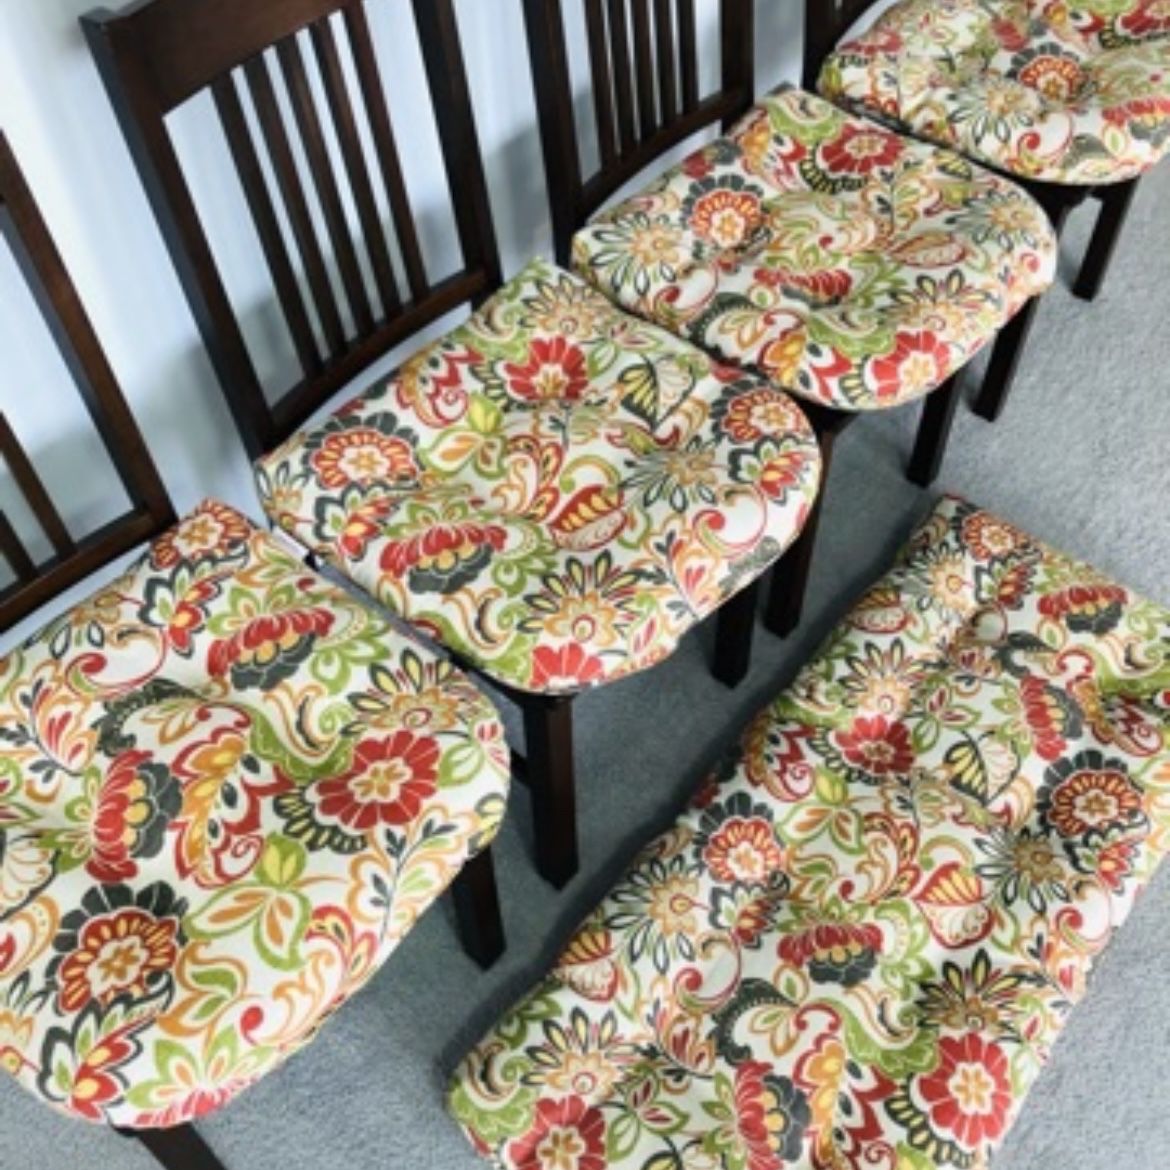 Set Of 5 Outdoor/ Indoor Seat Cushions! Flowers Design! Very Beautiful! Brand New!